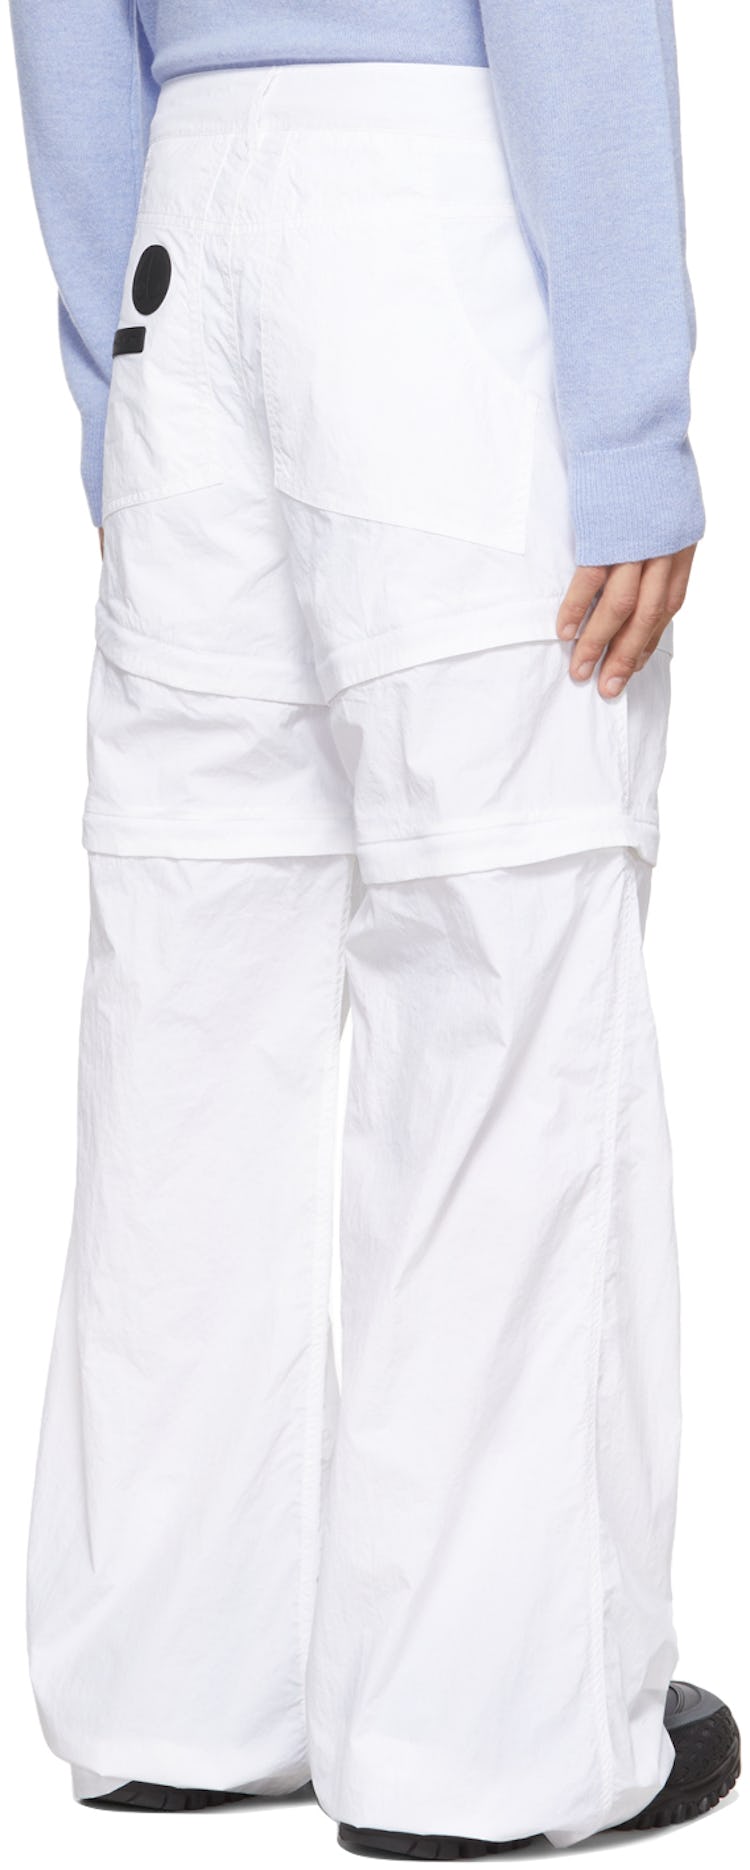 White Convertible Pants: additional image